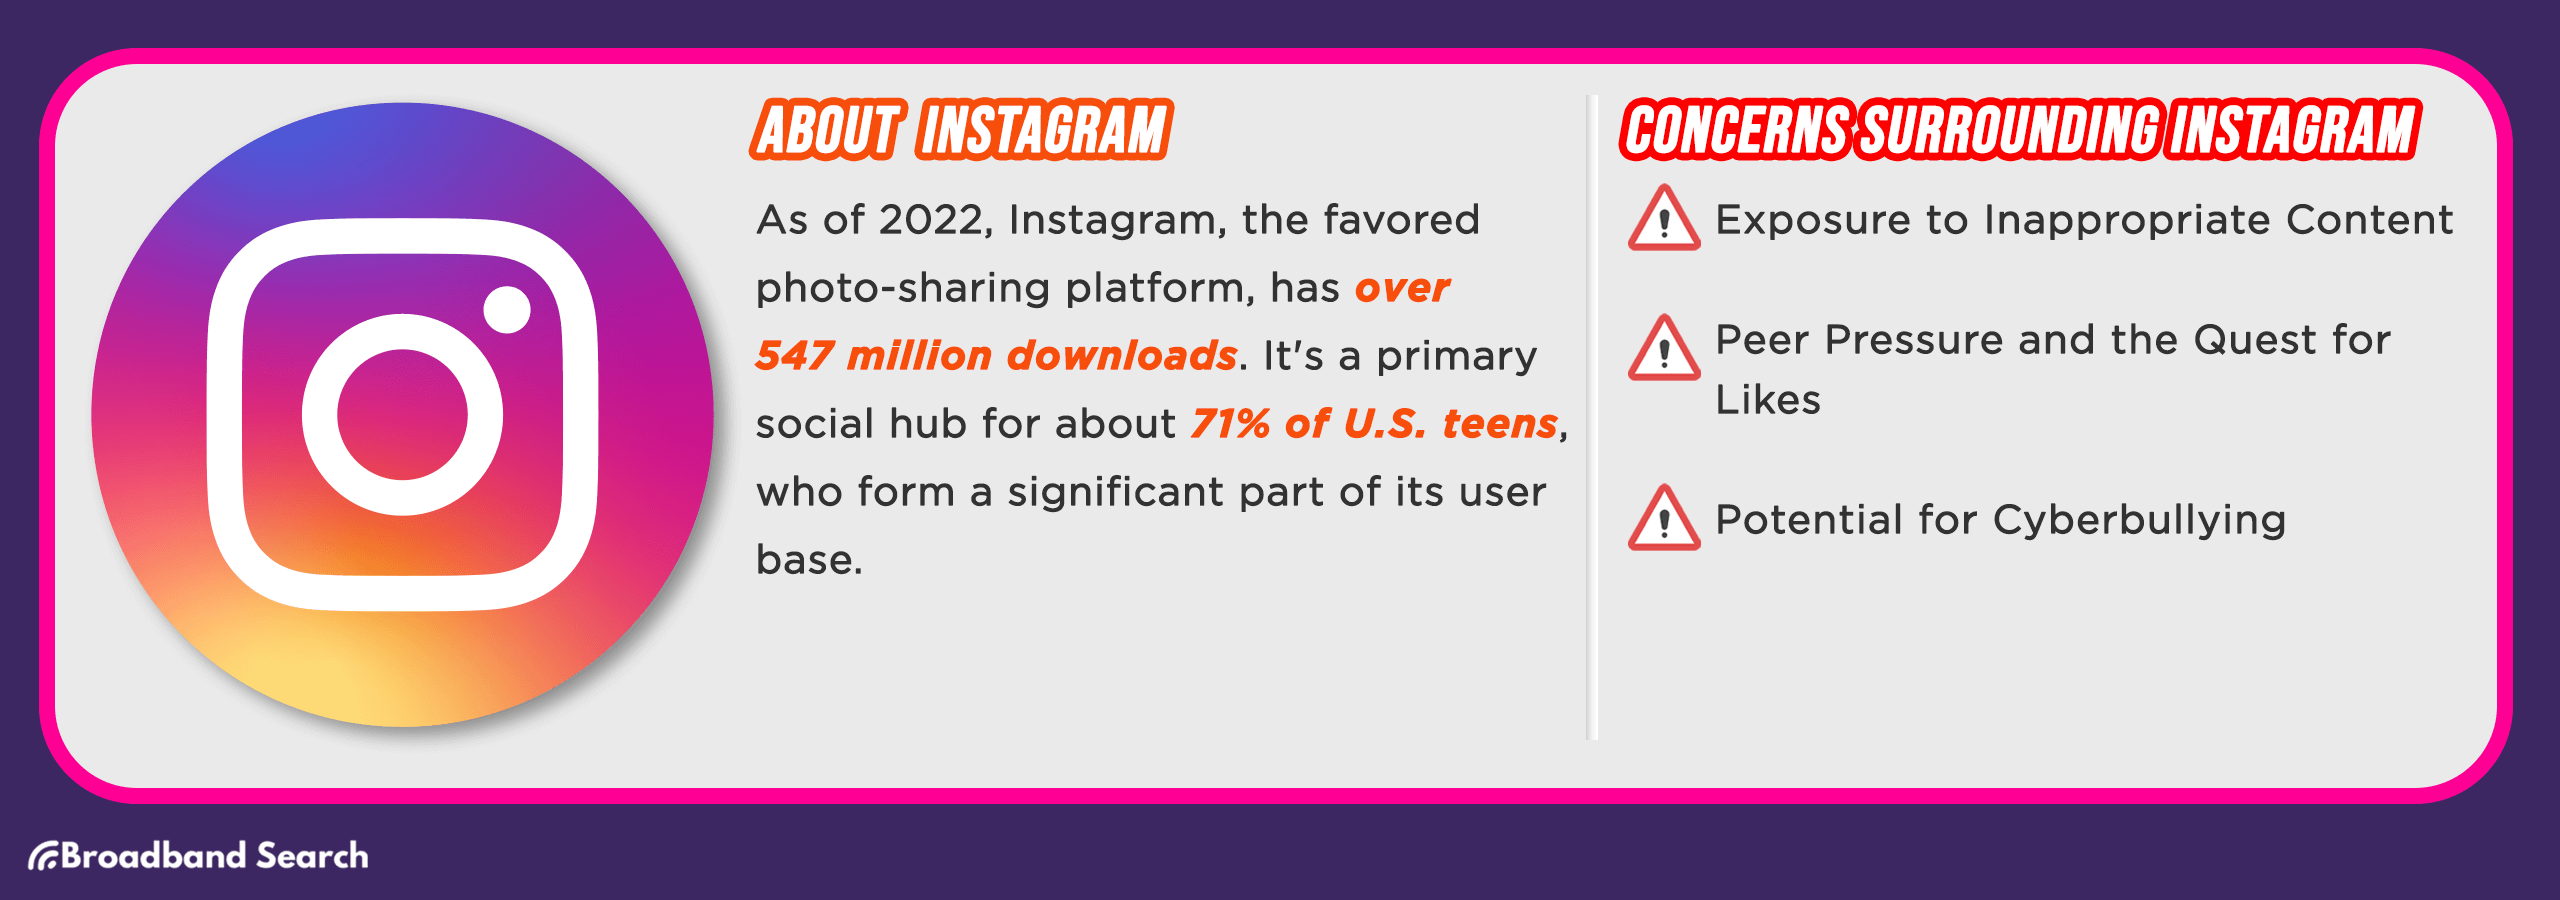 Statistics on Instagram and concerns surrounding usage of the social media app